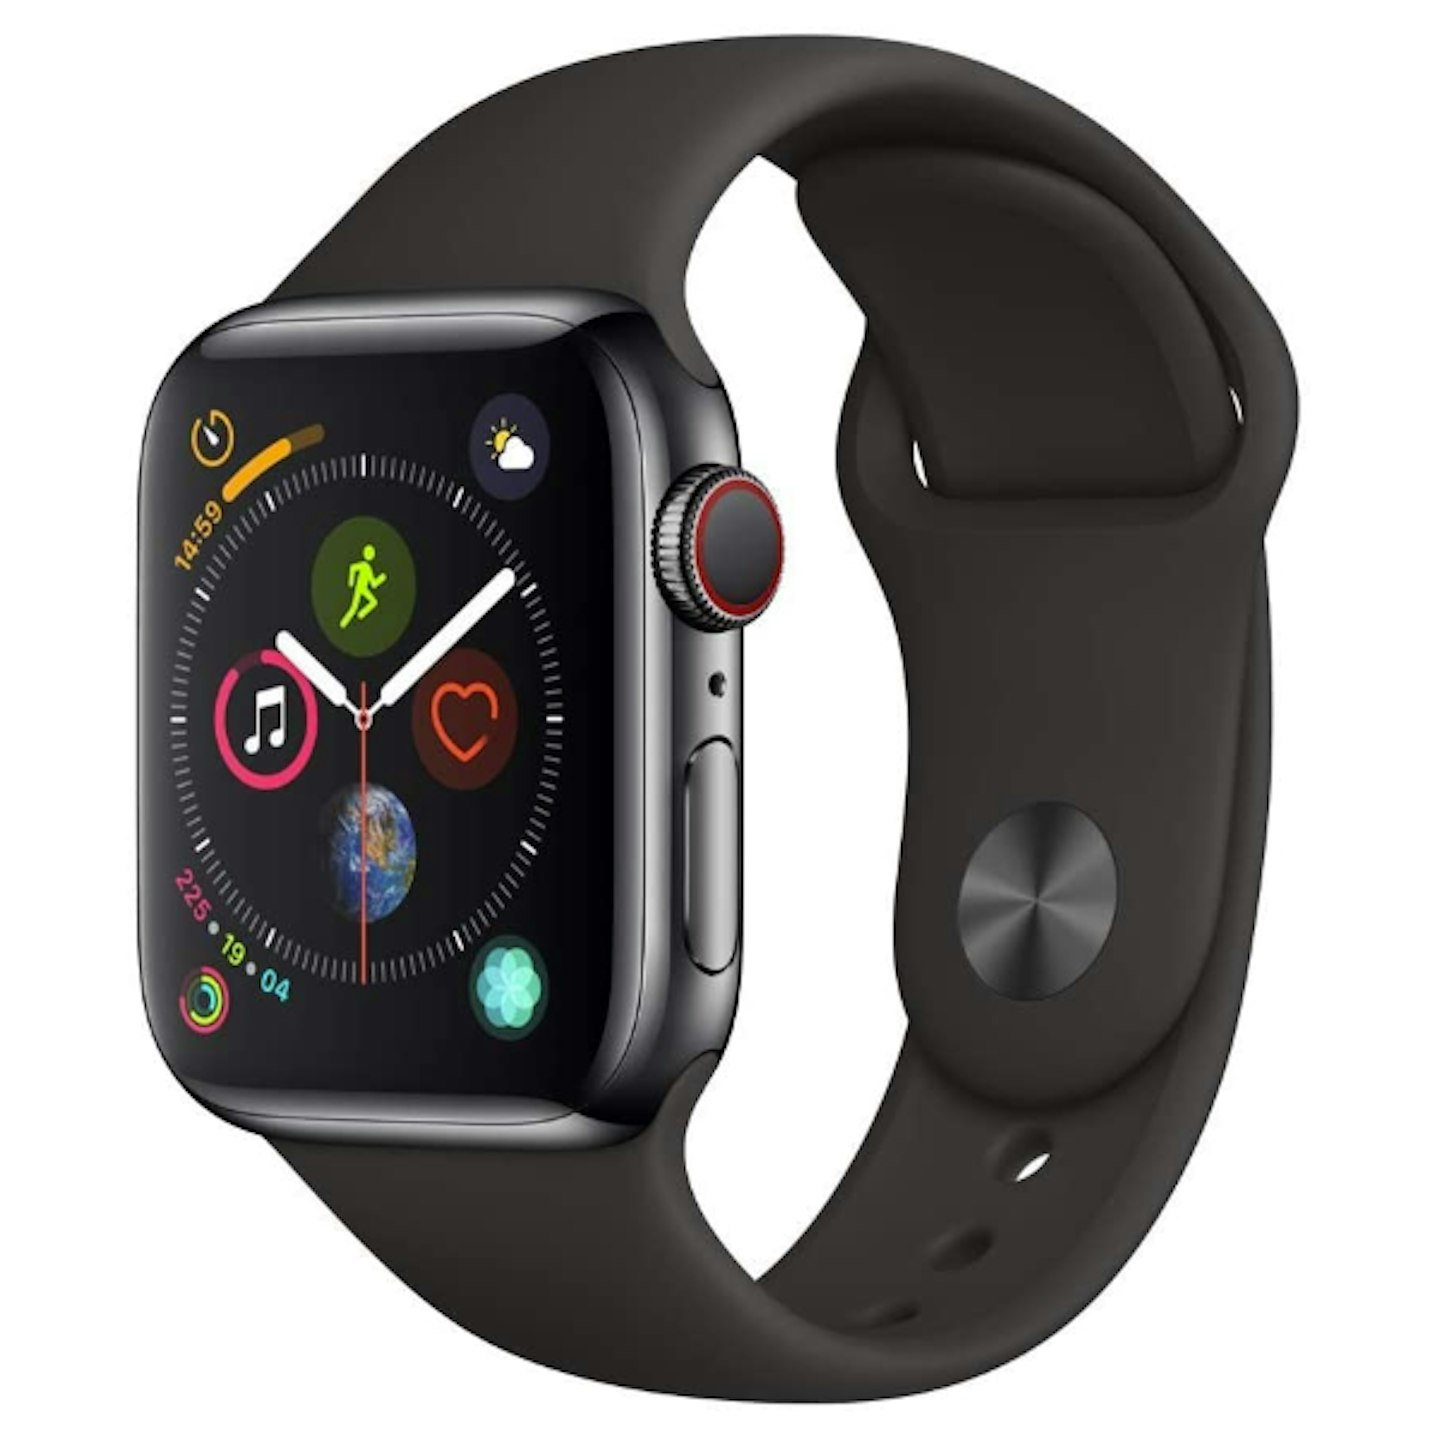 Apple Watch Series 4 with Cellular